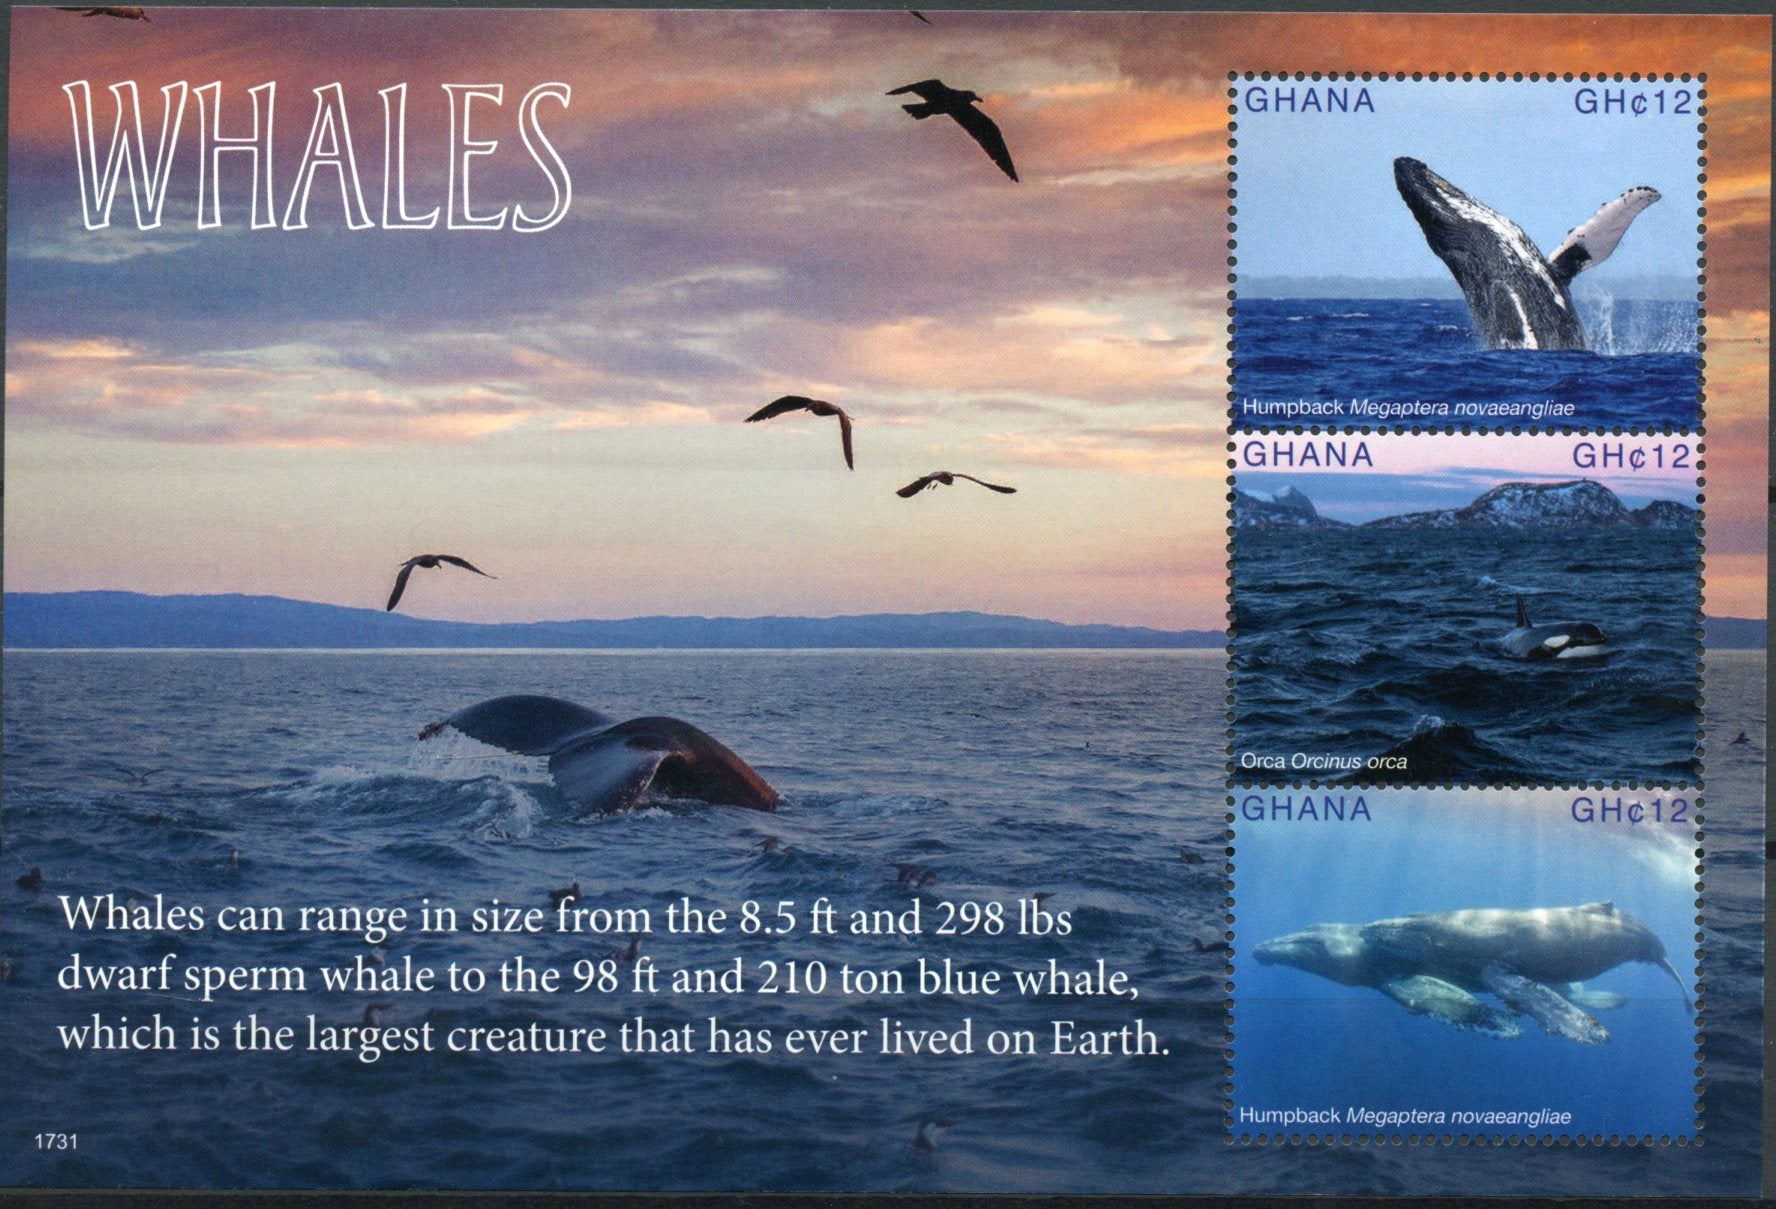 Ghana 2017 MNH Whales Humpback Whale Orca 3v M/S Marine Animals Stamps